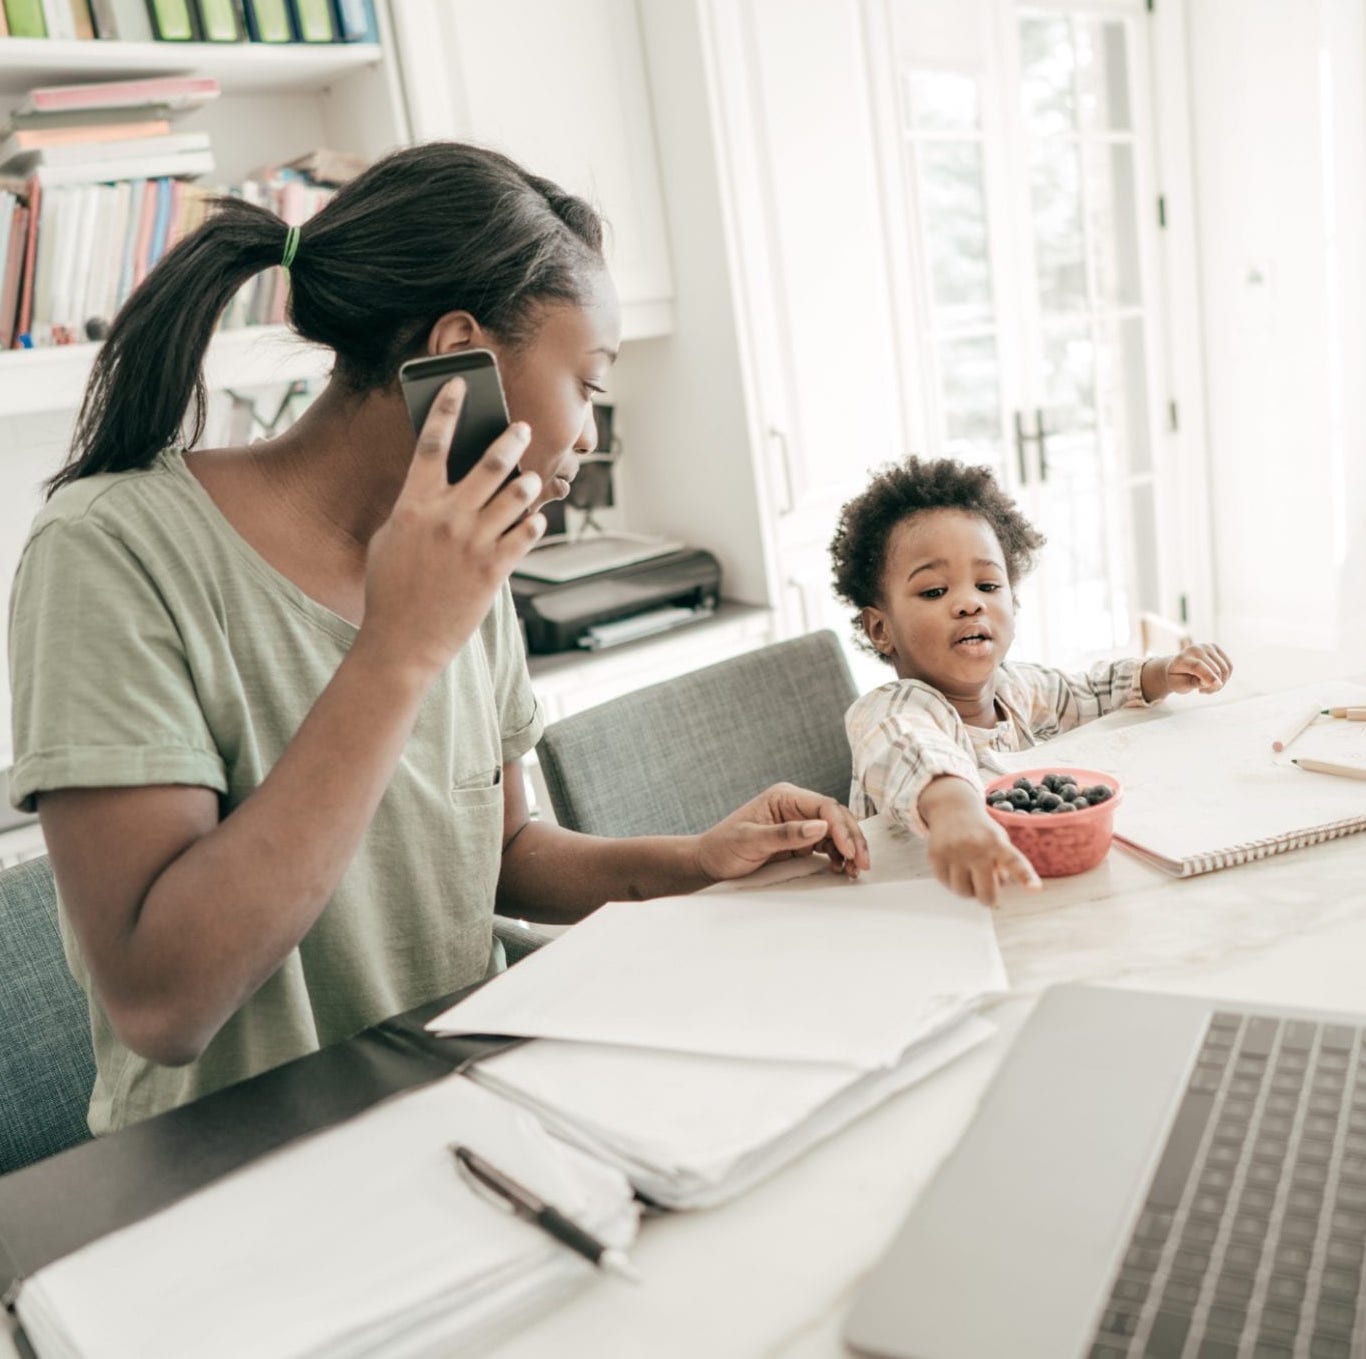 3 Helpful Tips for Parents Suddenly Working From Home With Kids